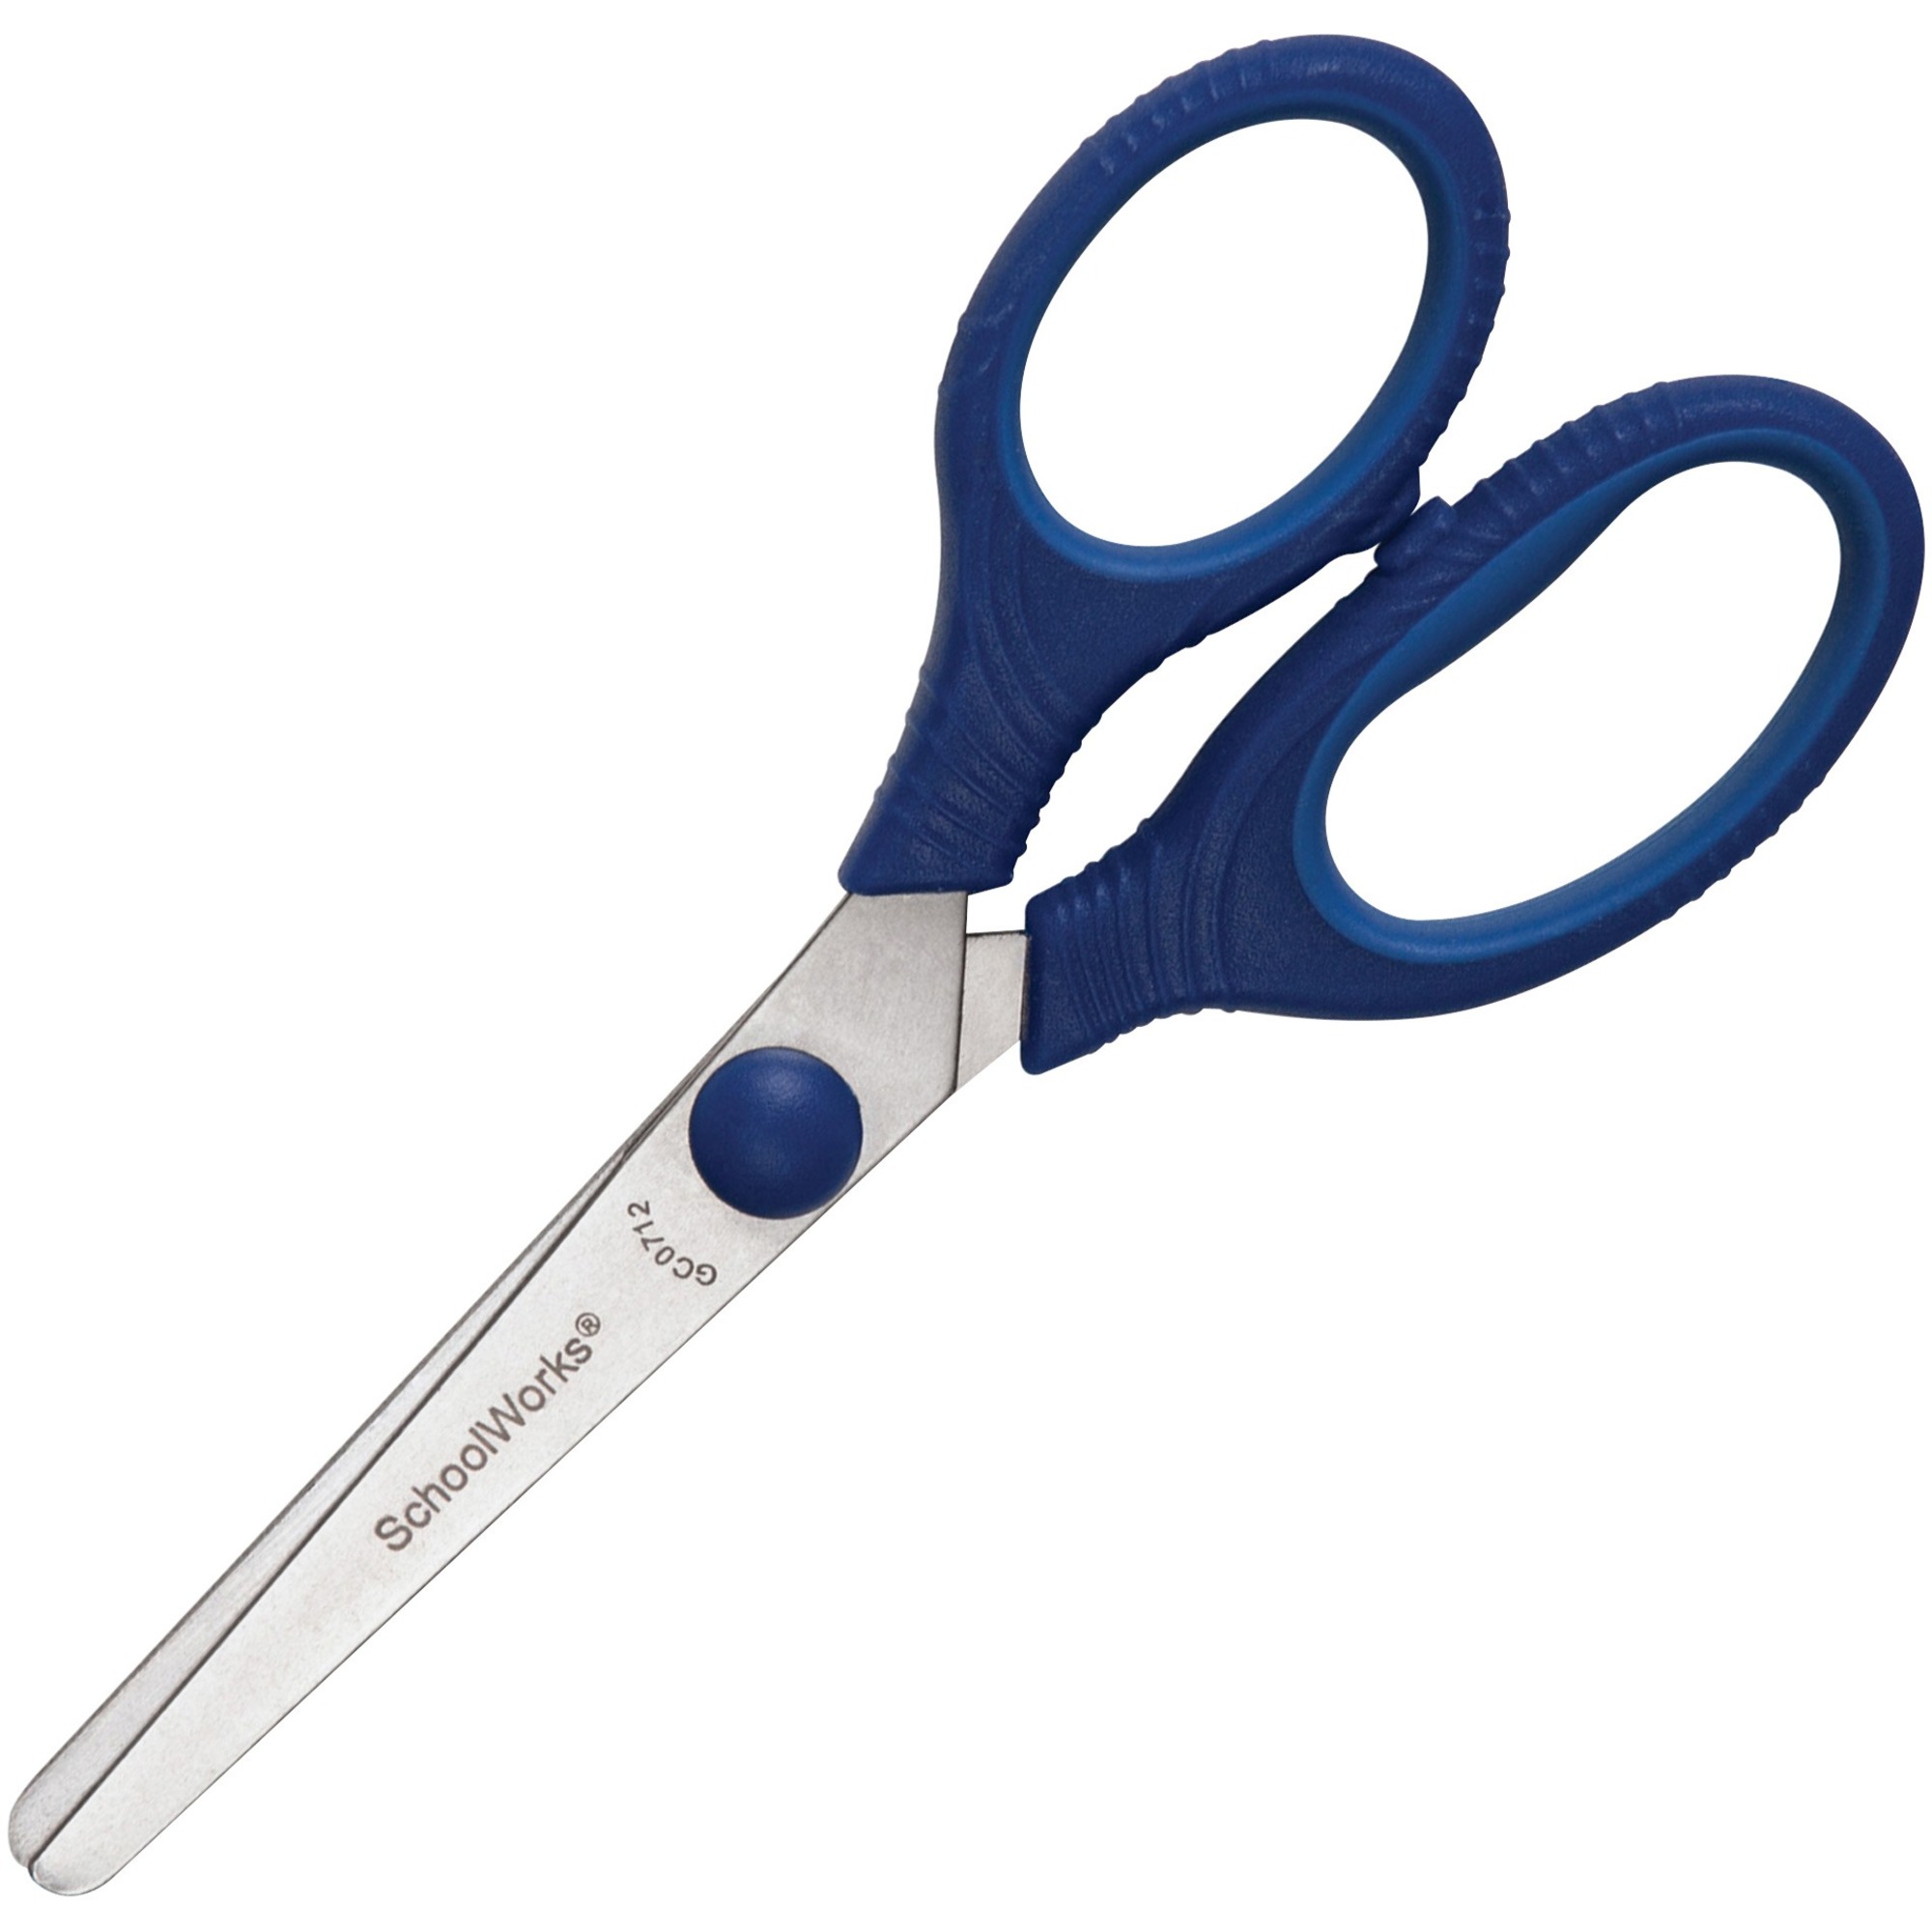 5 Pointed SchoolWorks Scissors - Ready-Set-Start